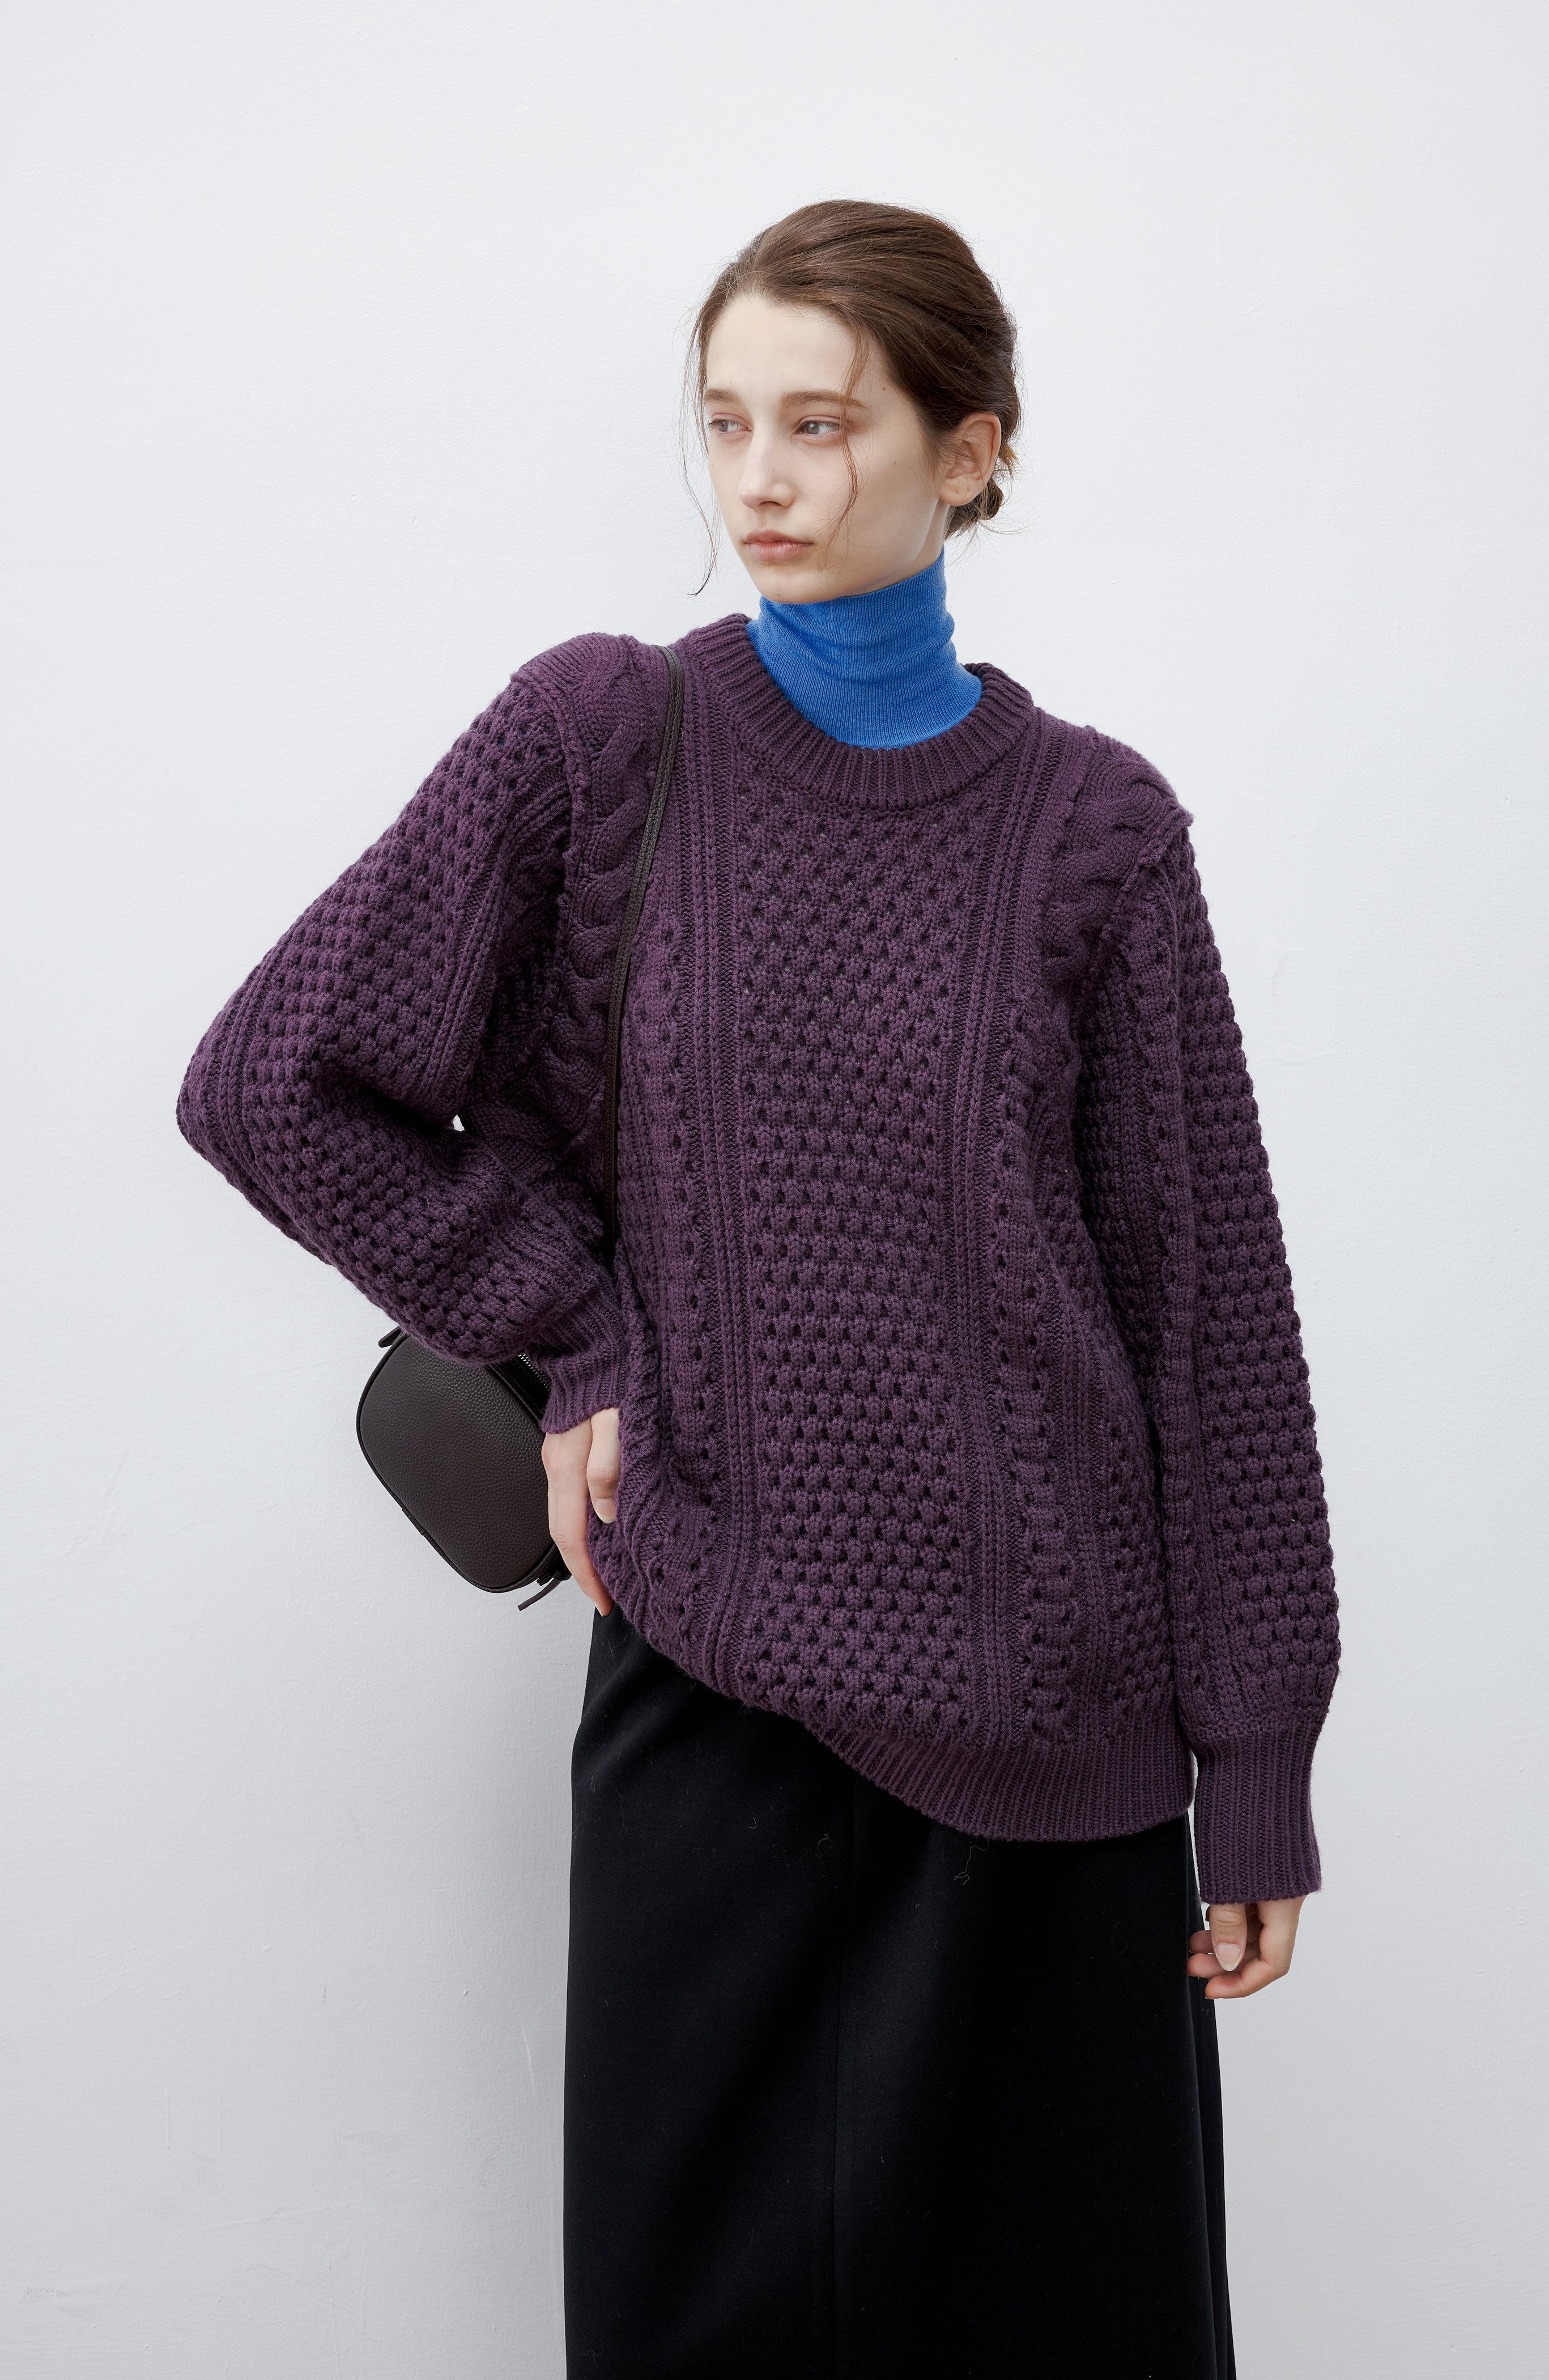 CONTRAST CABLE MIX WOOL KNIT / コントラストケーブルミックスウール